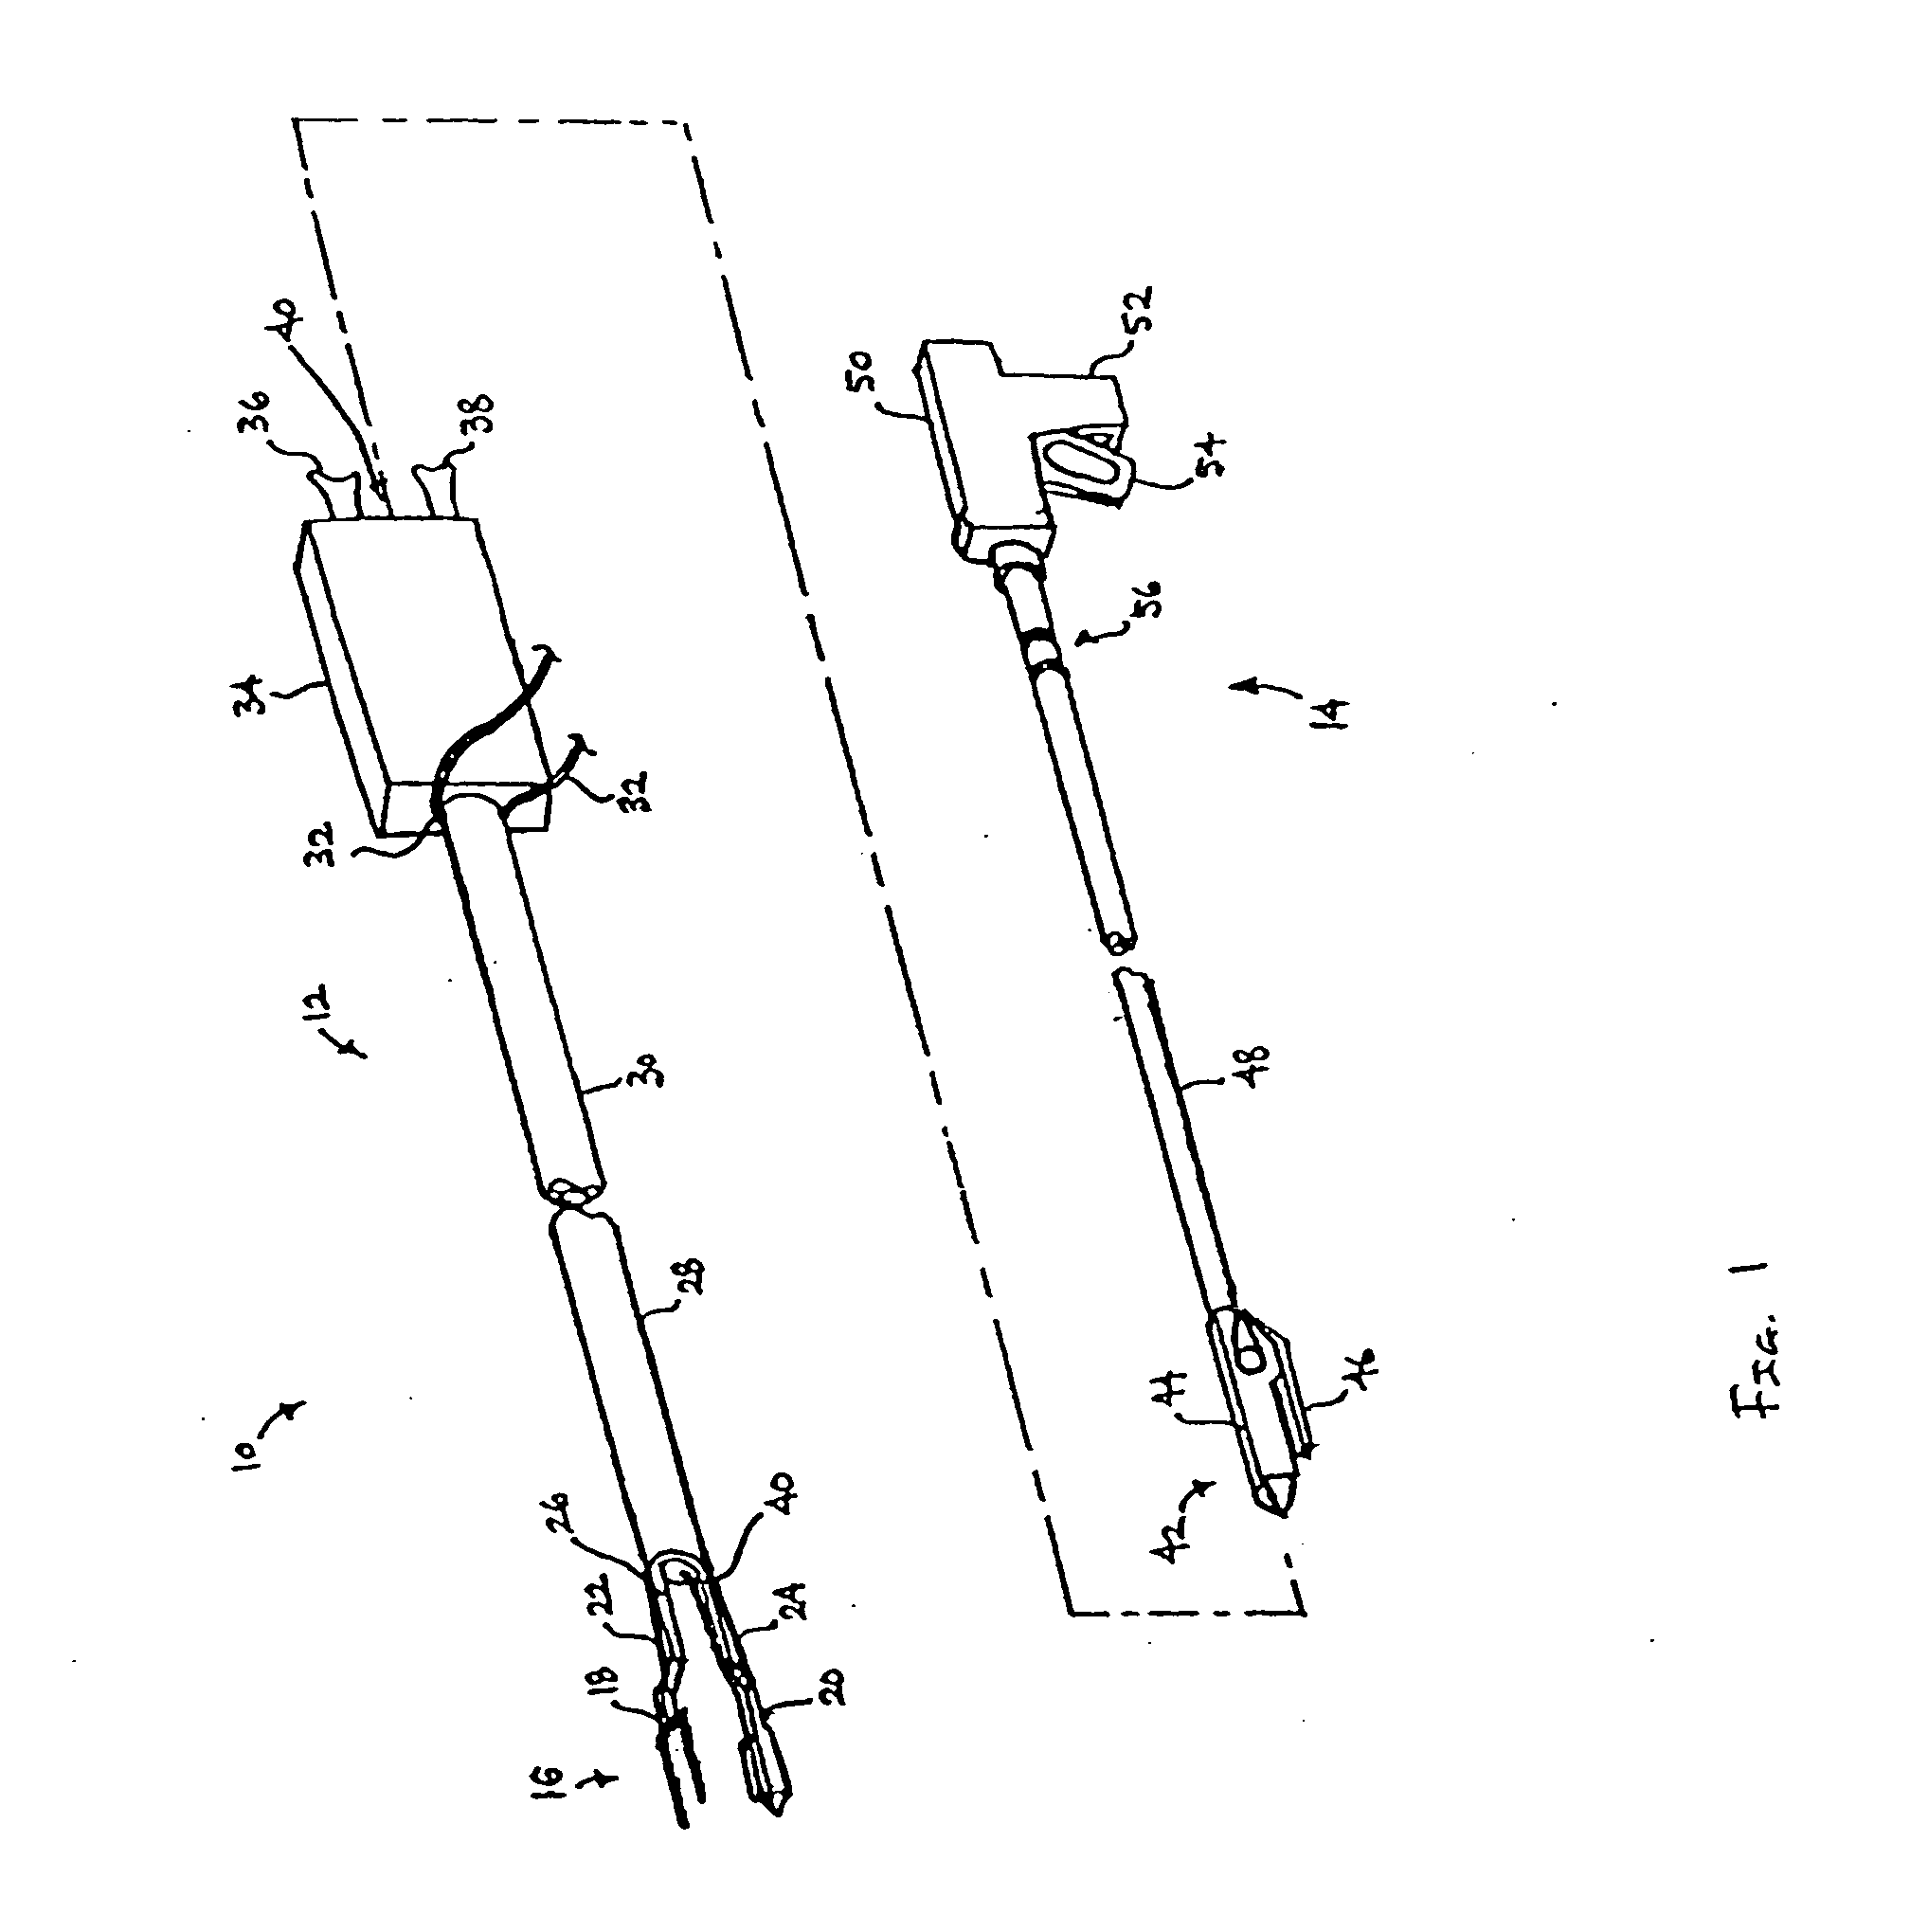 Single fold system for tissue approximation and fixation